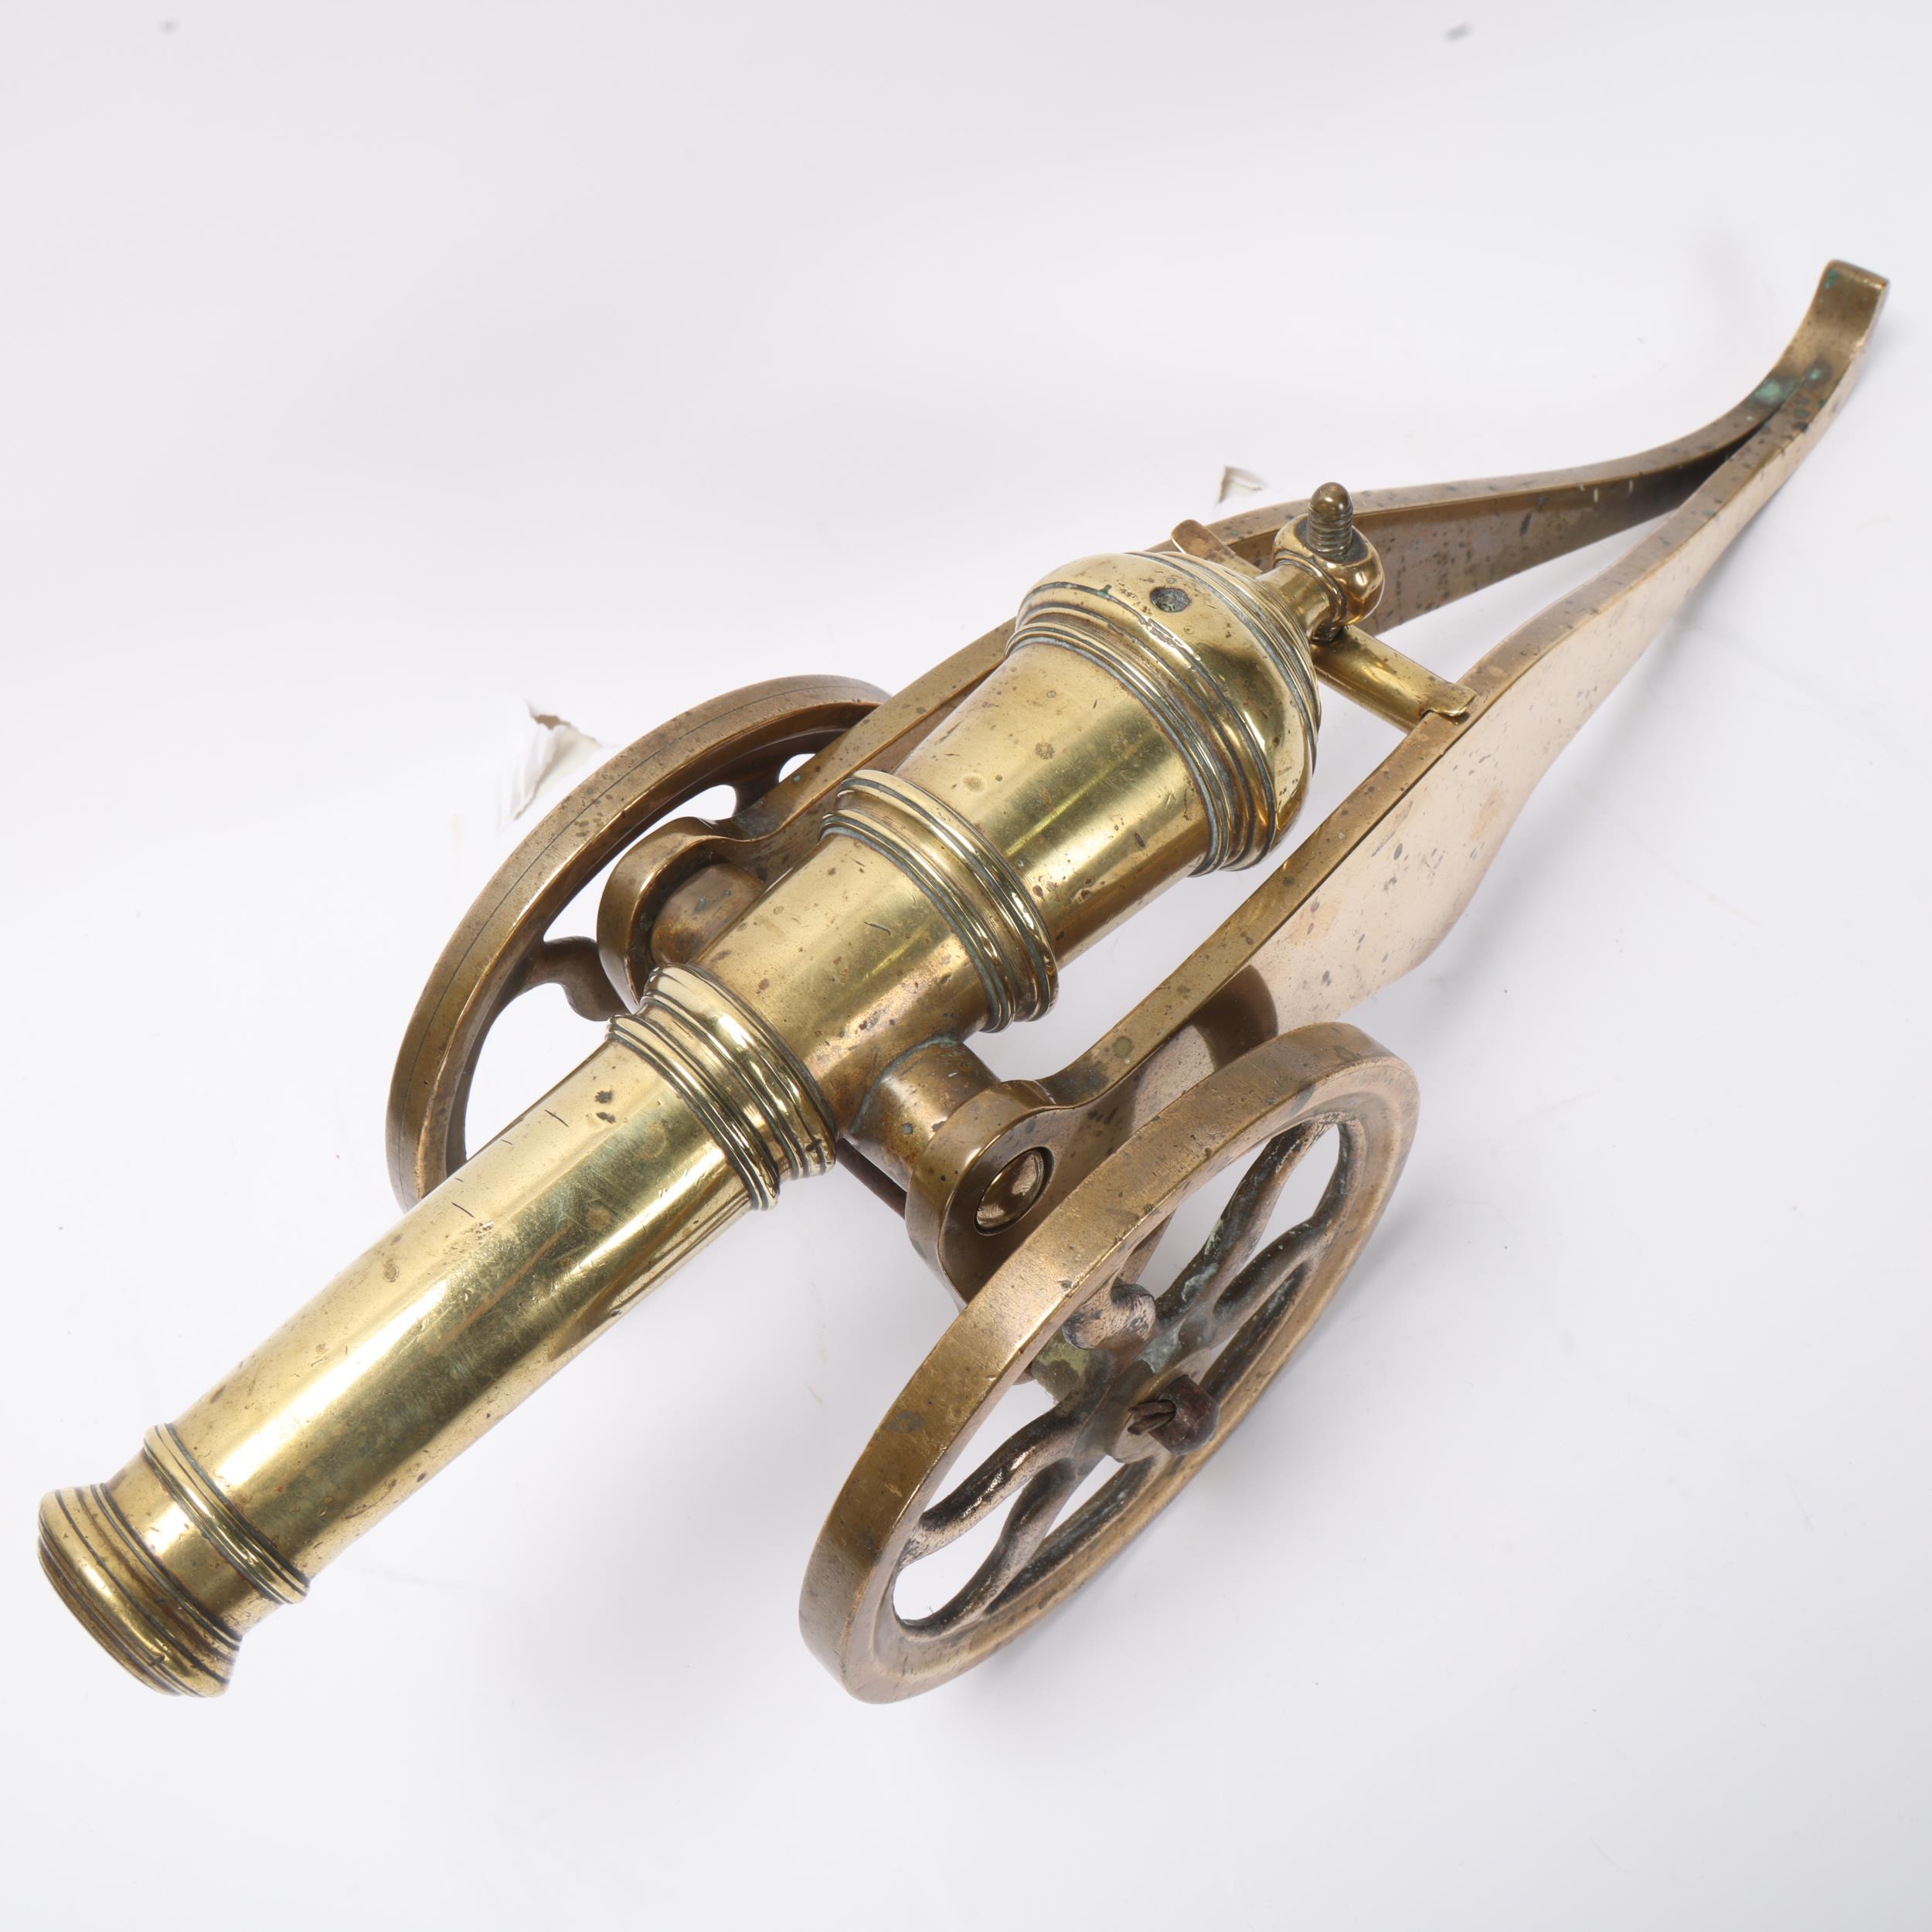 A good quality brass table cannon, 18th or 19th century with ringed barrel on wheeled carriage, - Image 3 of 3